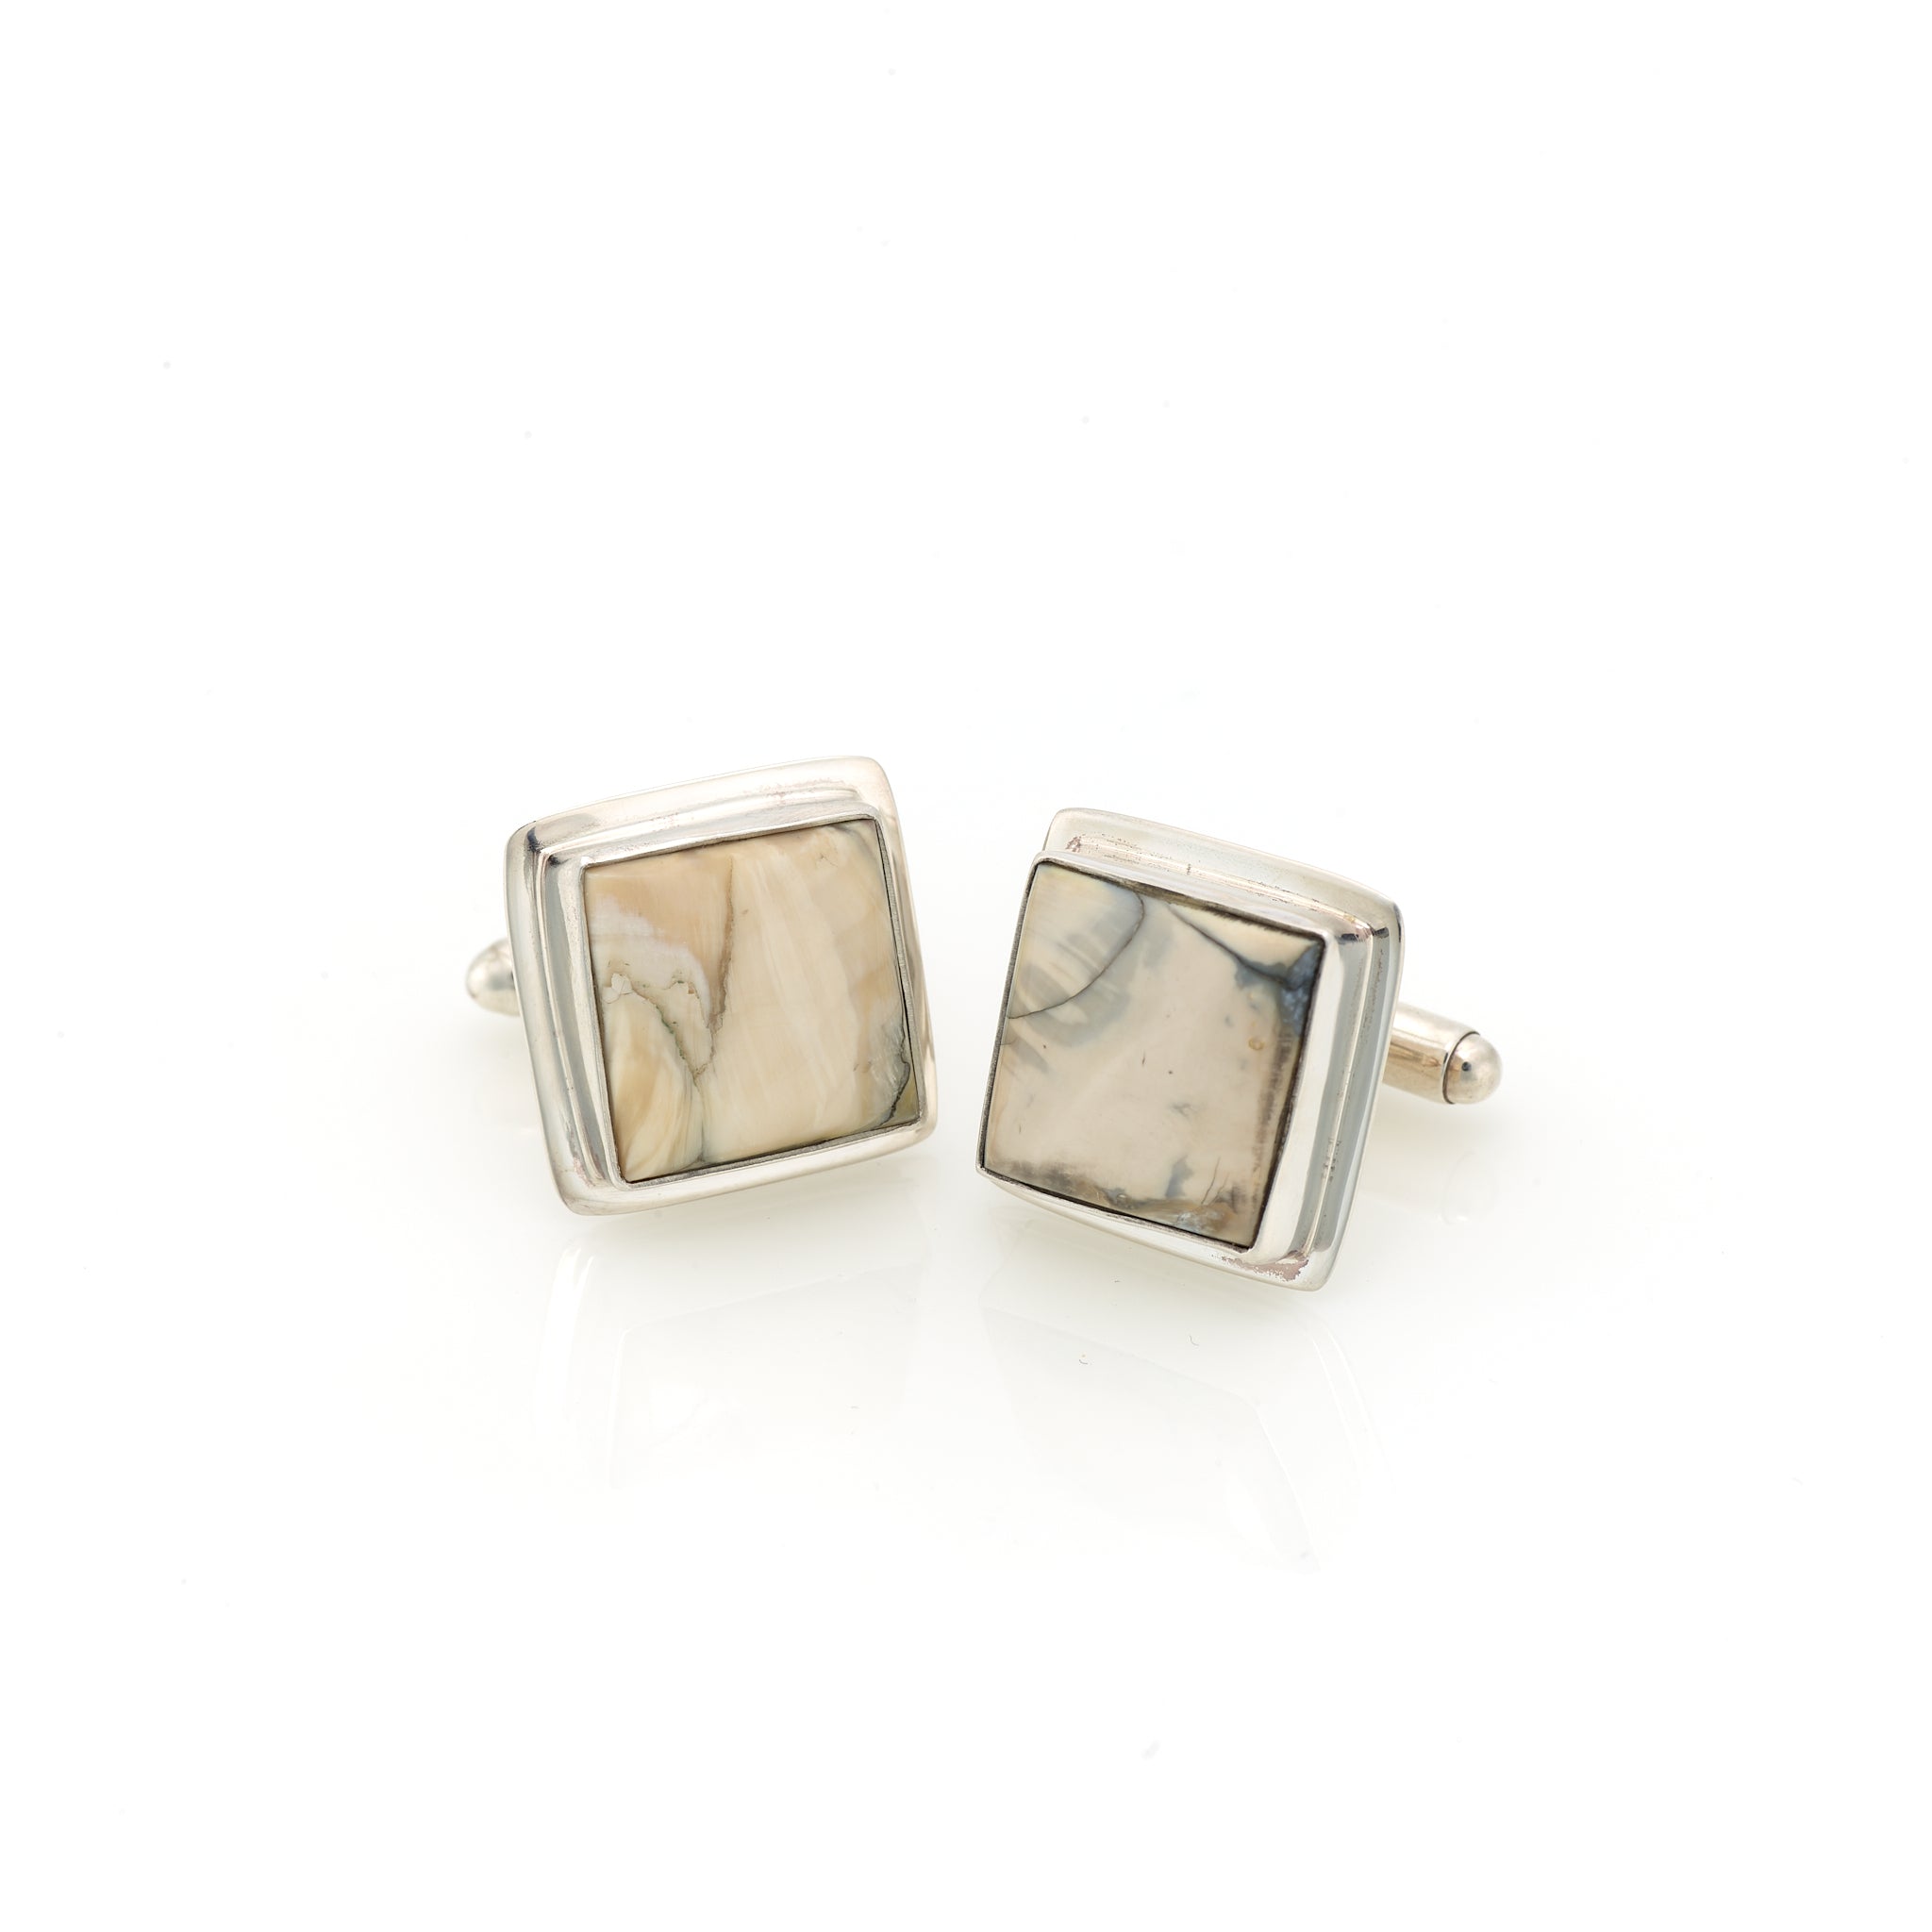 Domed Mammoth Tooth Square Cufflinks